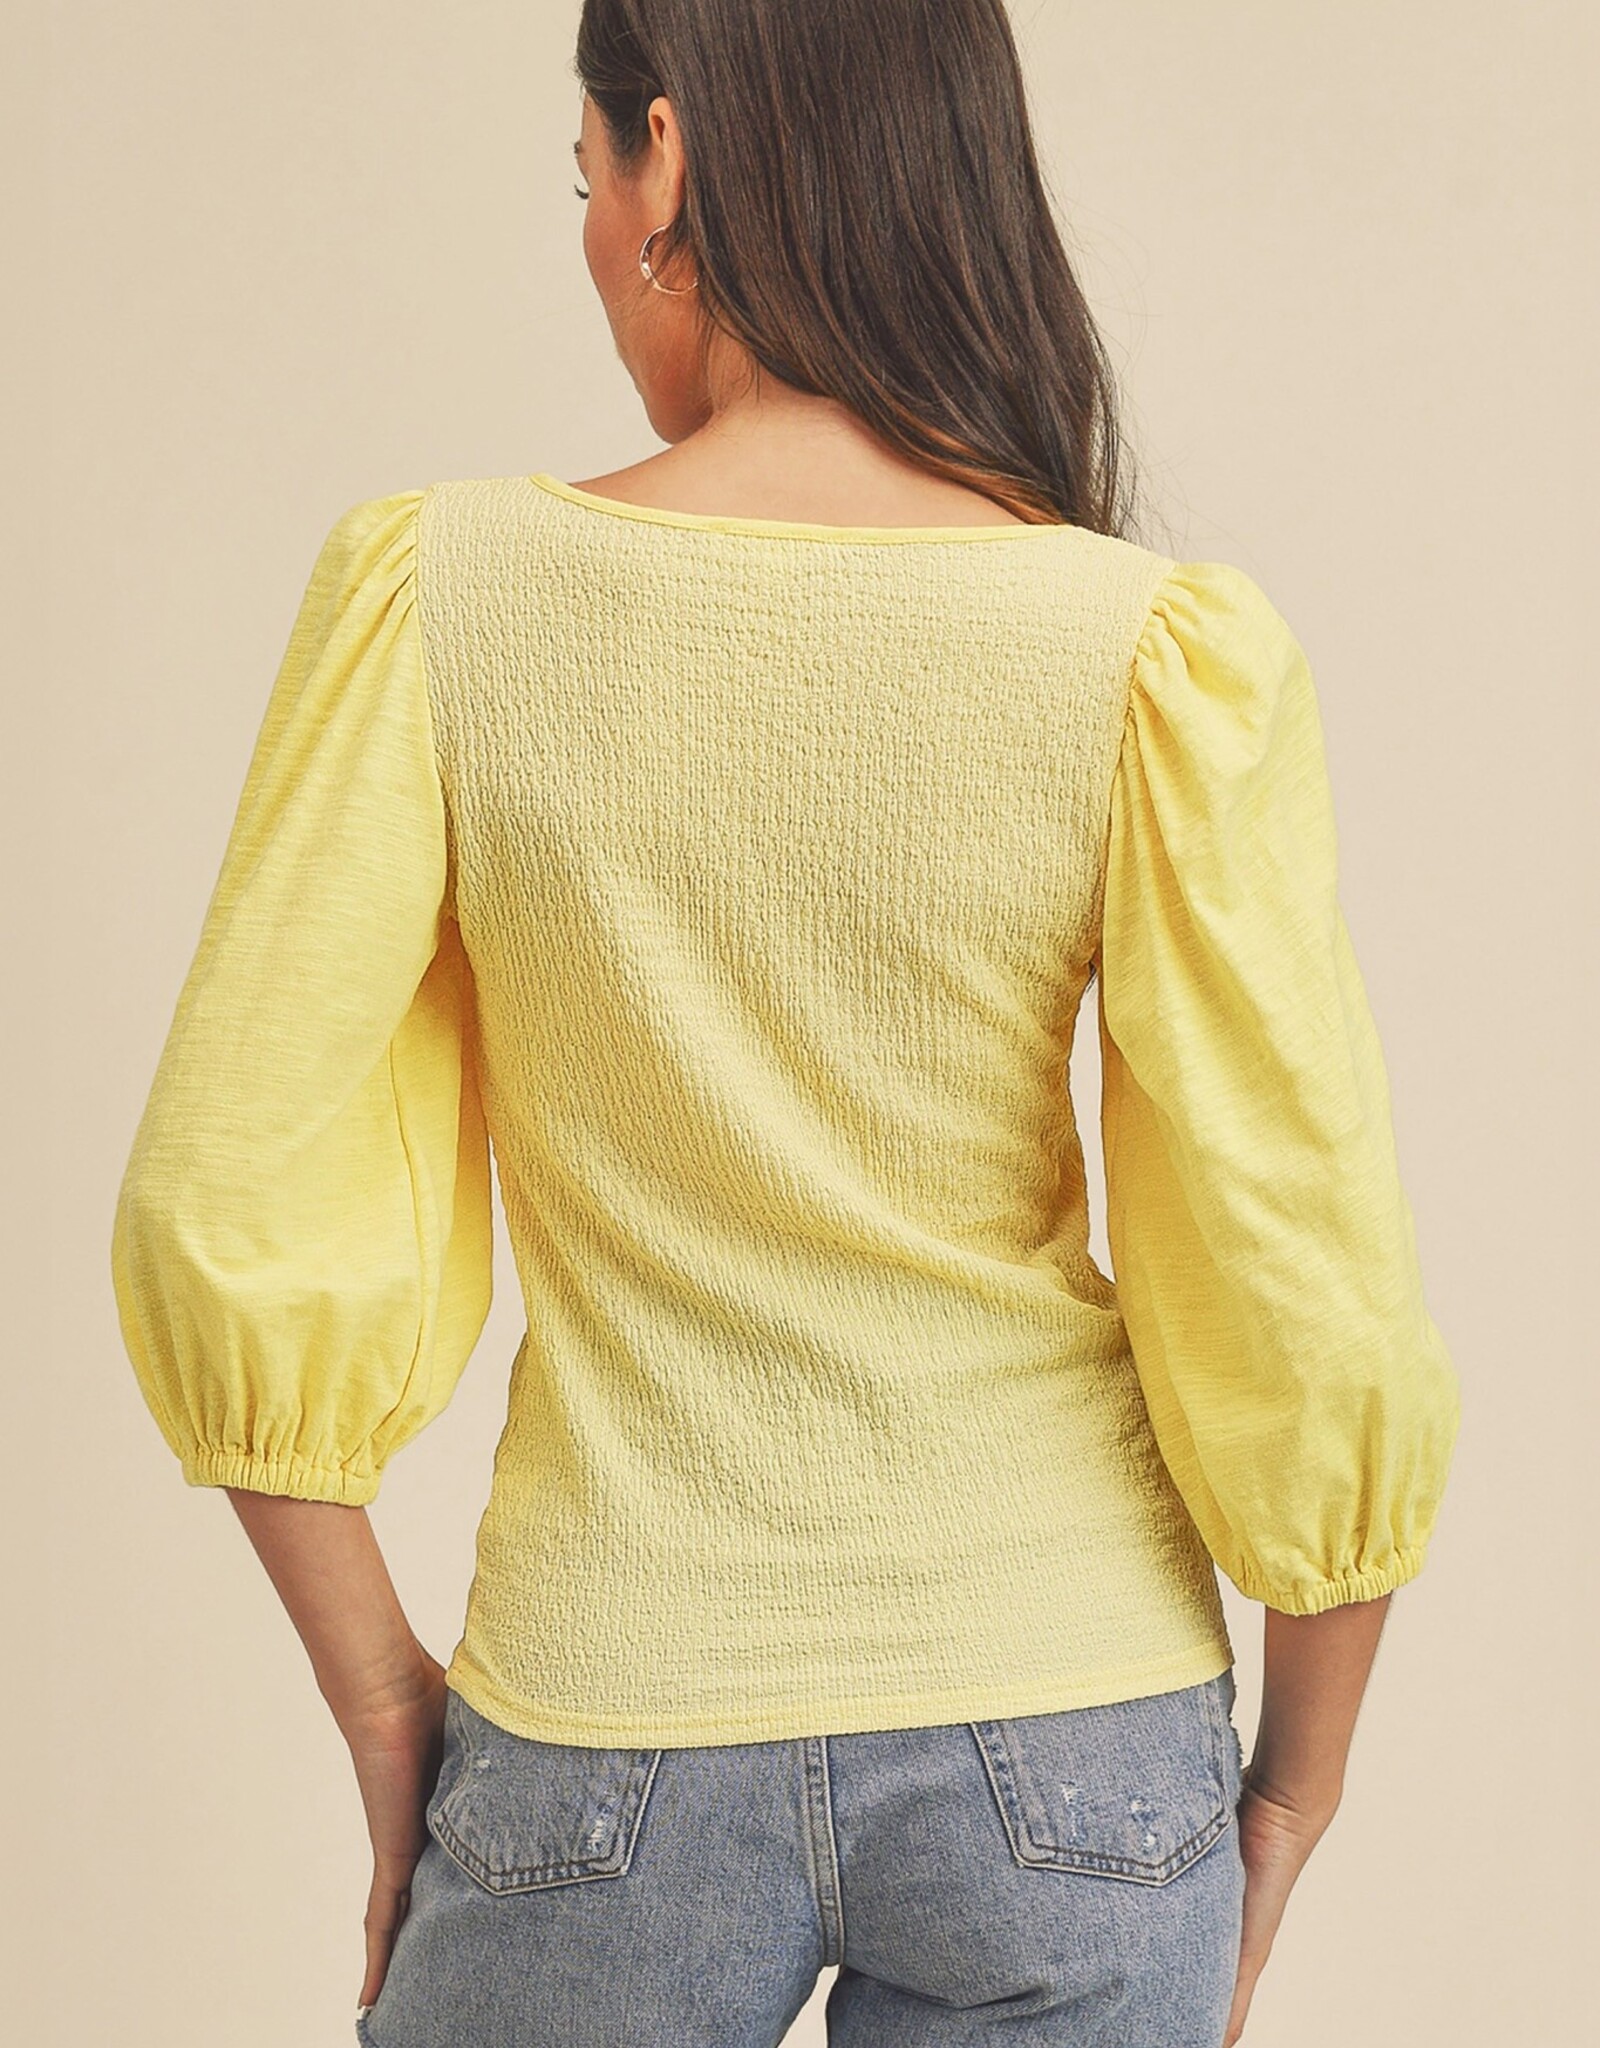 Miss Bliss Ginny Top-Yellow